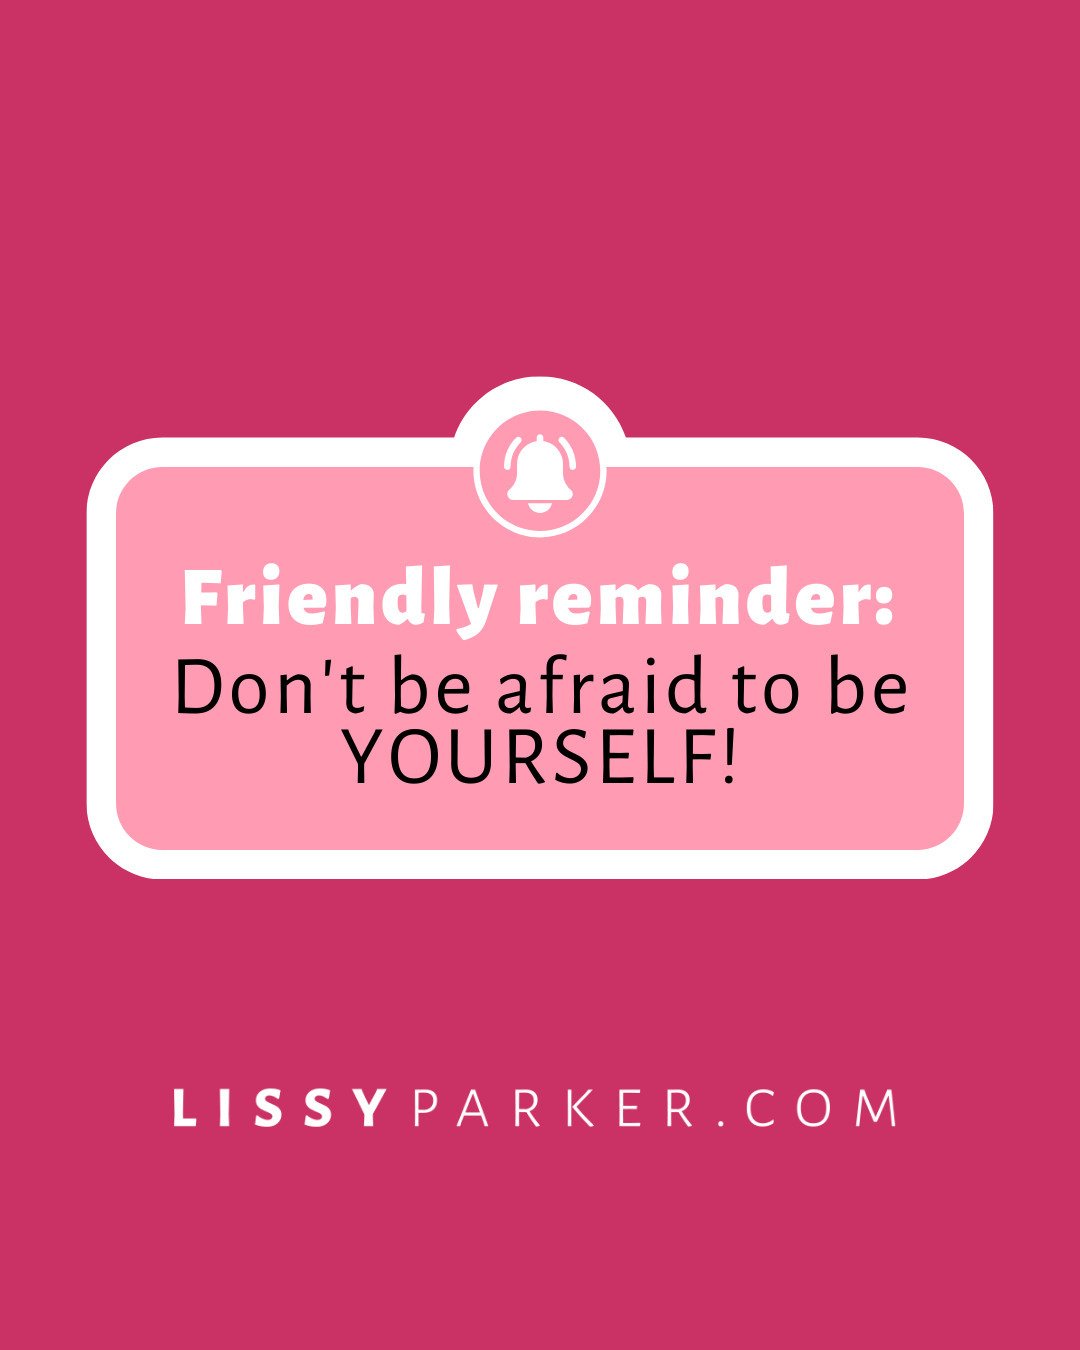 Here's a friendly reminder...💡

Let's be real here! There's no one else in this world that can pull off being you better than - well, YOU!
The world needs your individuality, your passion, your energy. Because YOU make this world a better, brighter,